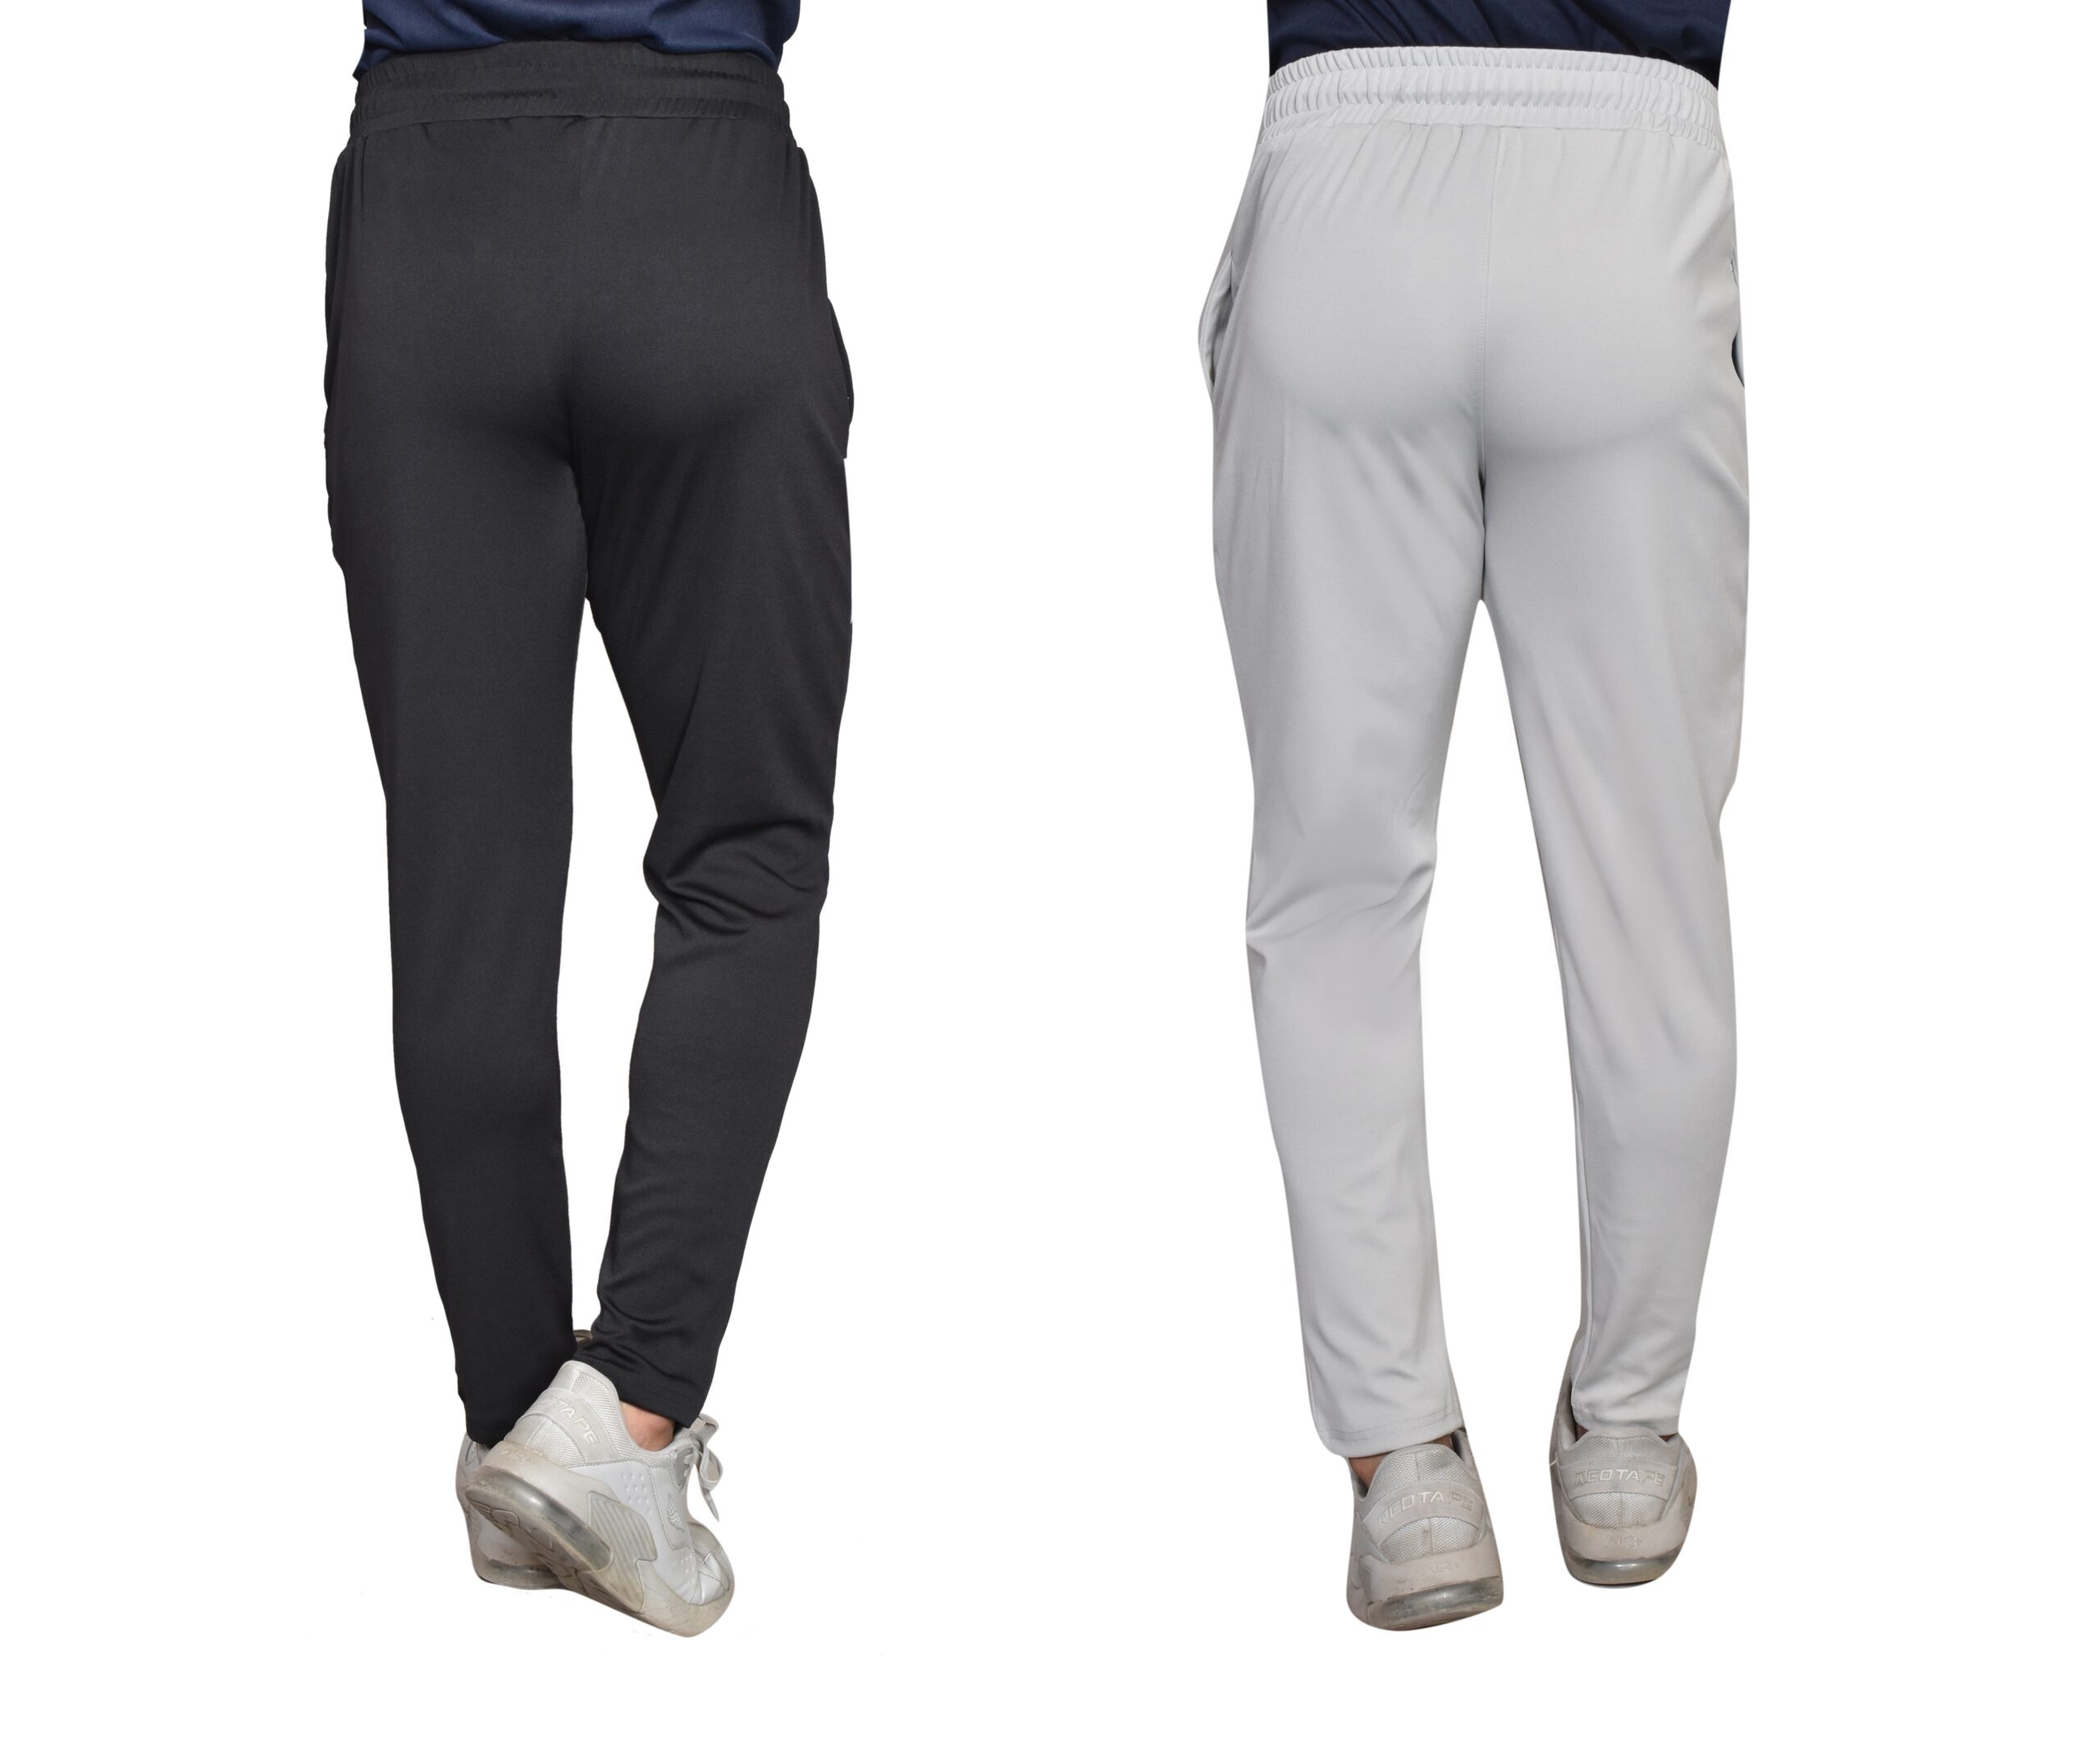 combo black and gray track pant back side